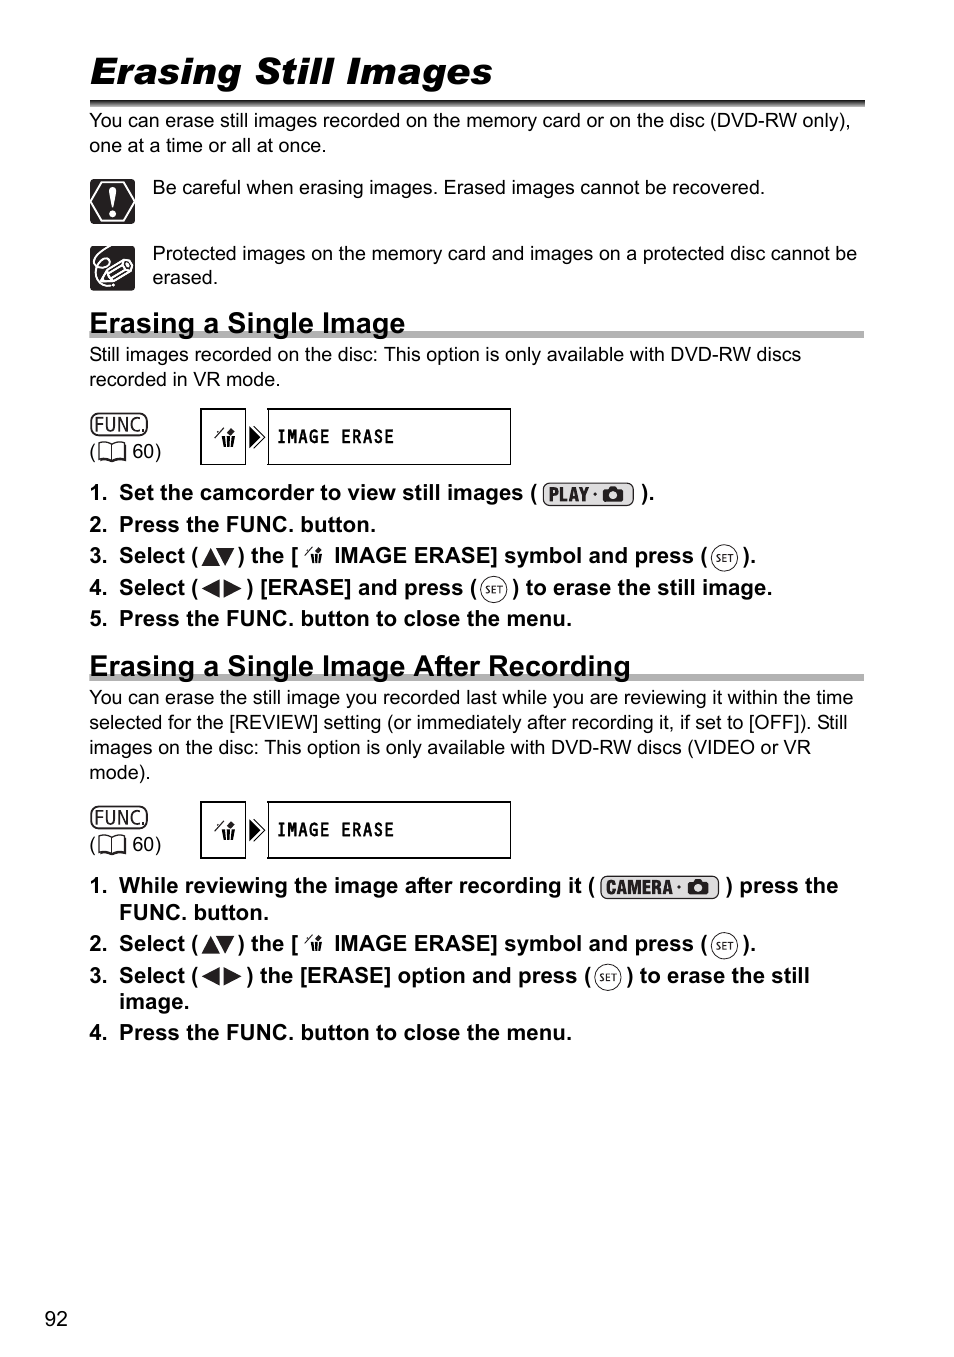 Still image options, Erasing still images, Erasing a single image | Erasing a single image after recording | Canon DC40 User Manual | Page 92 / 144